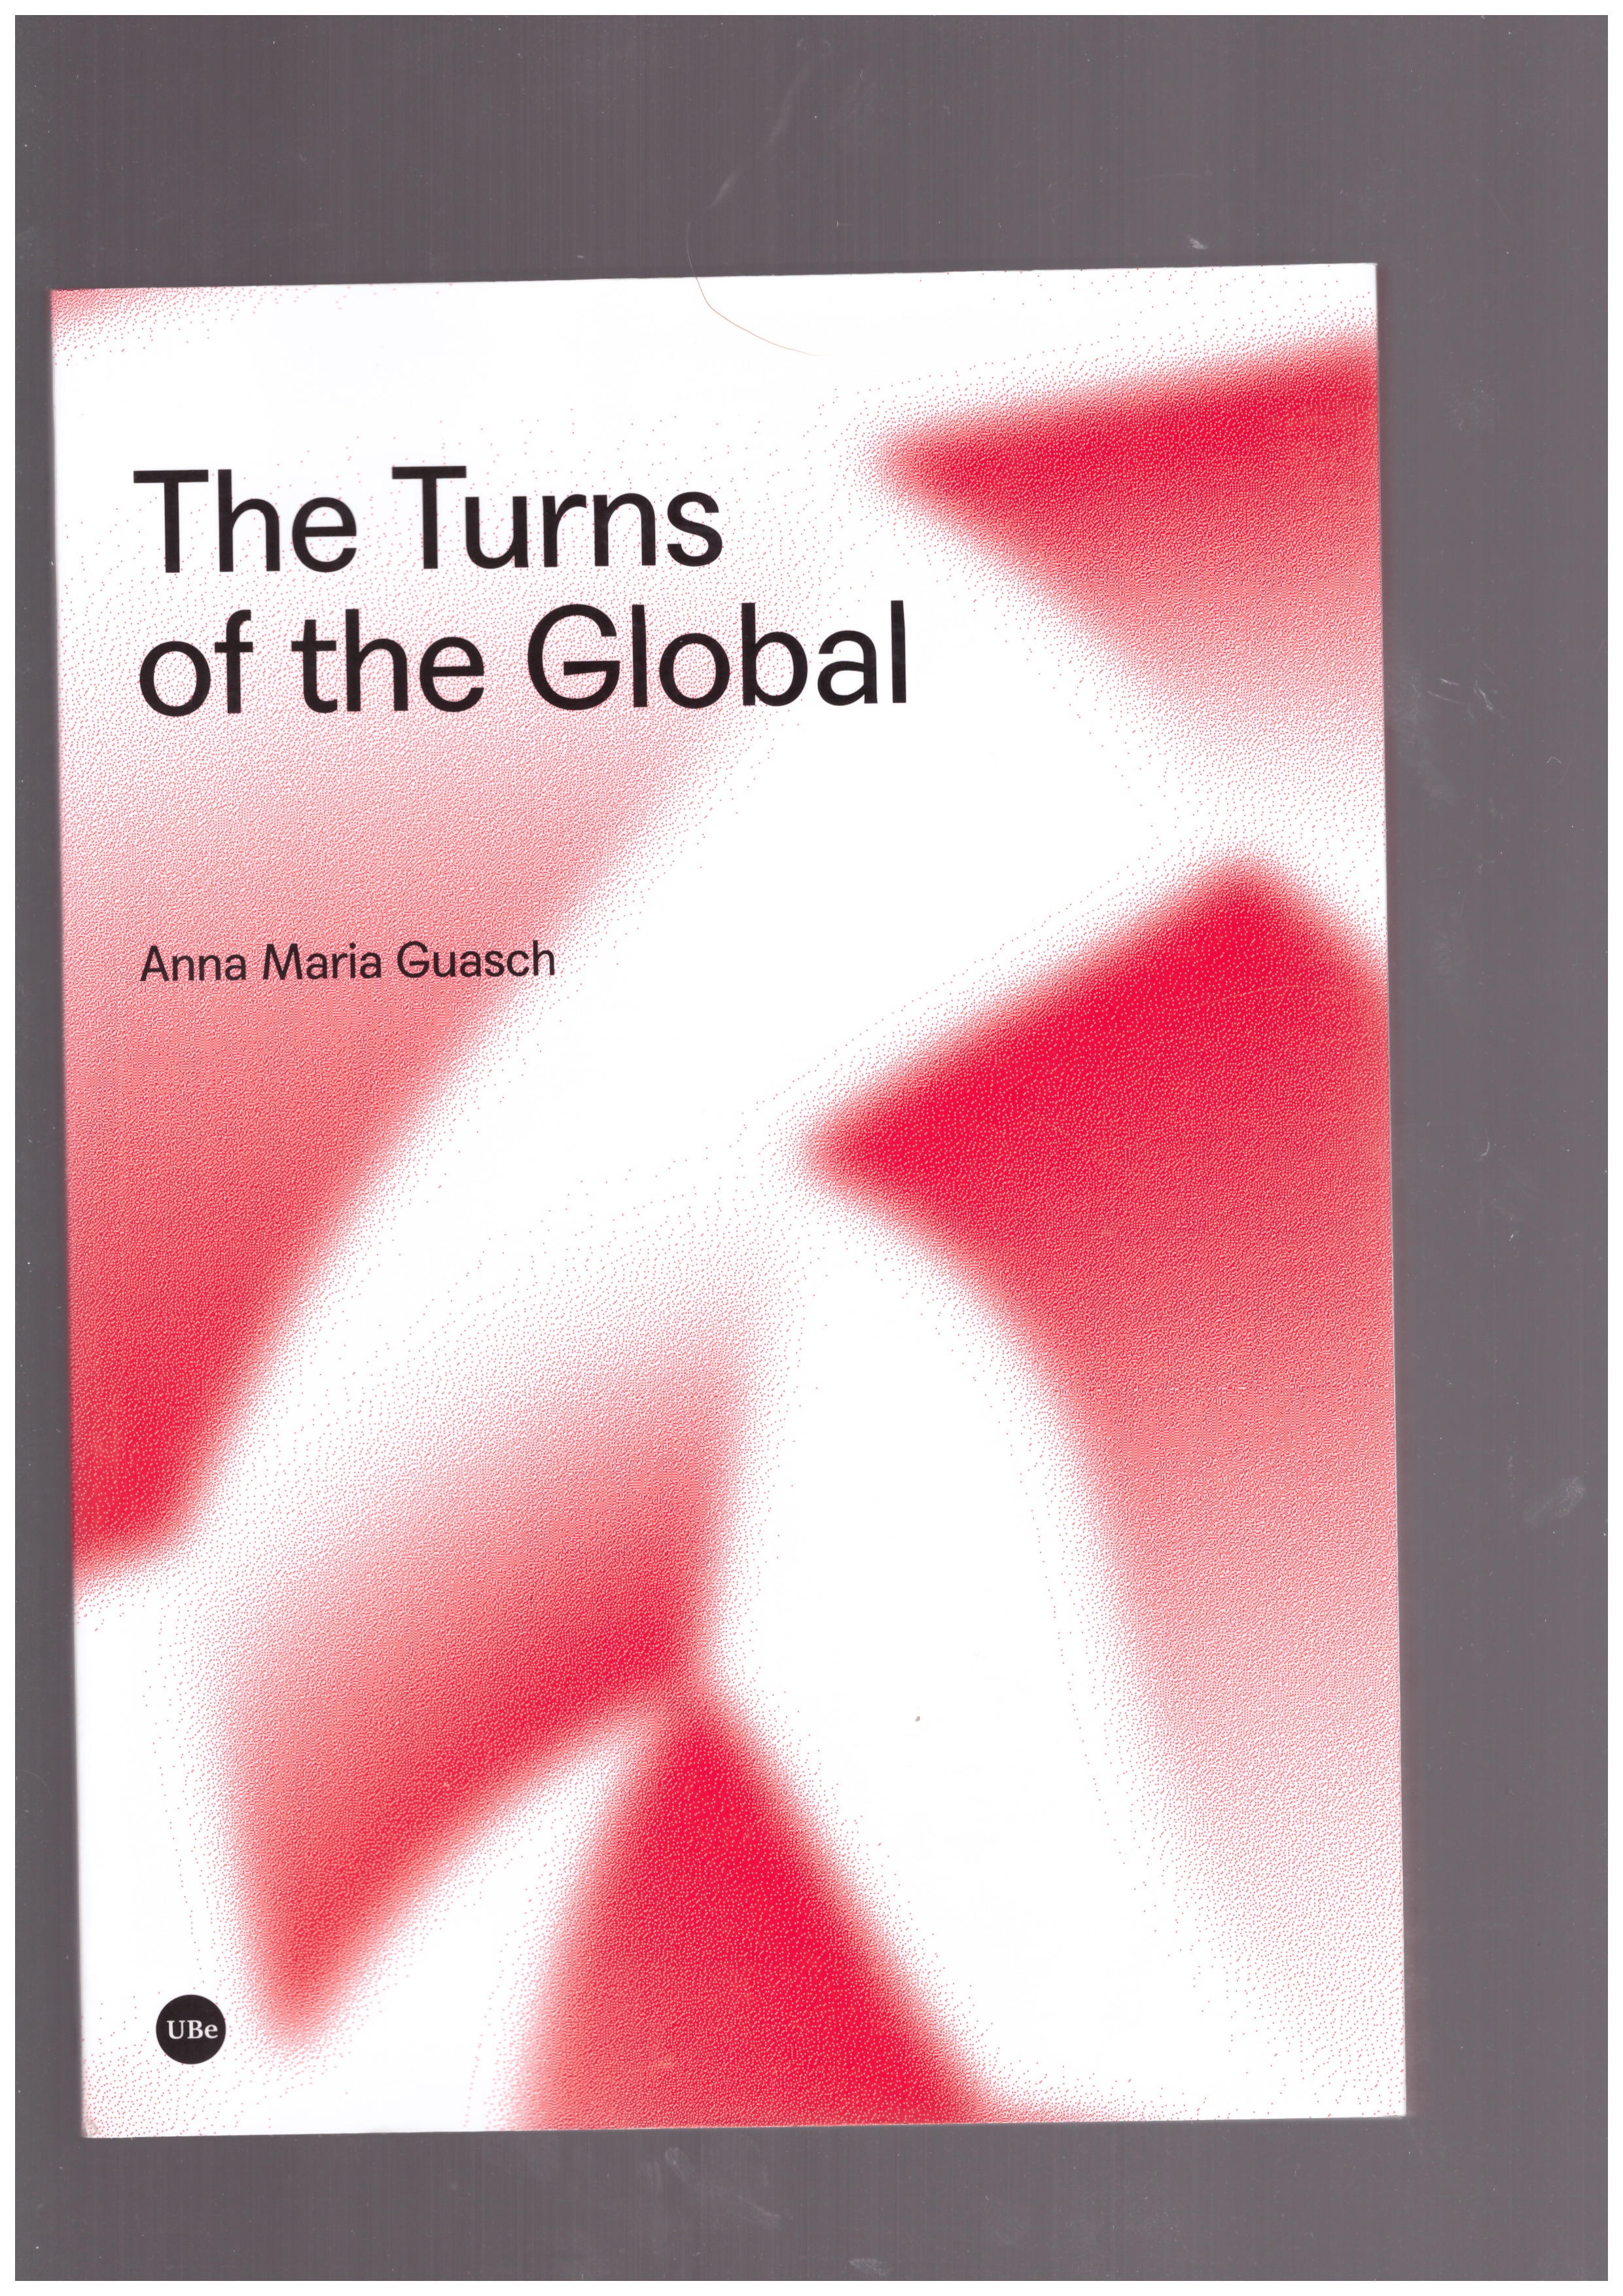 GAUSCH, Anna Maria - The Turns of the Global